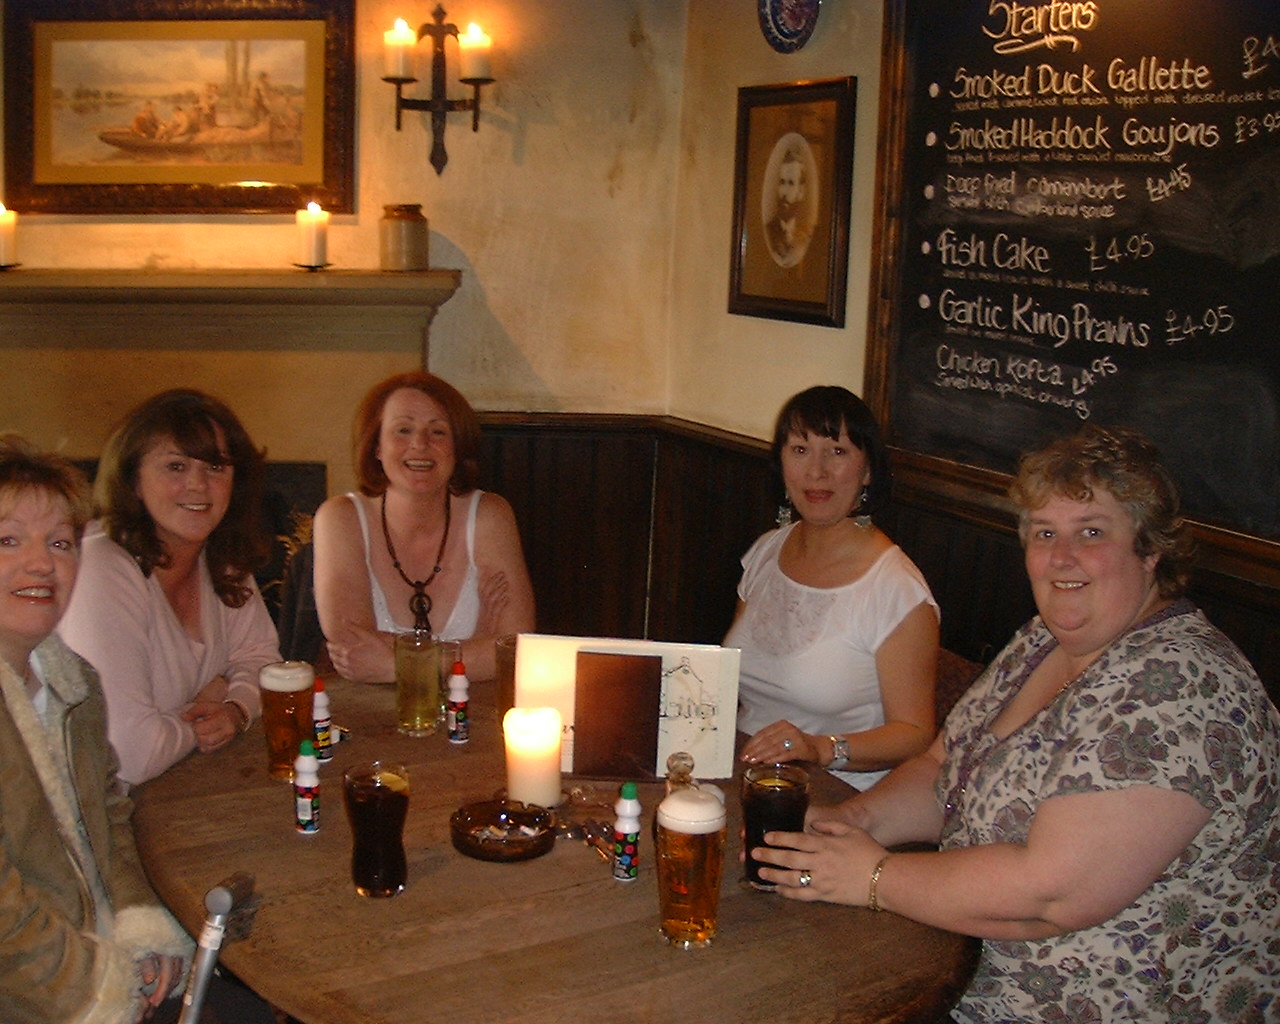 Lyd, Debs, kp, vd and jb at the Ravensworth Arms